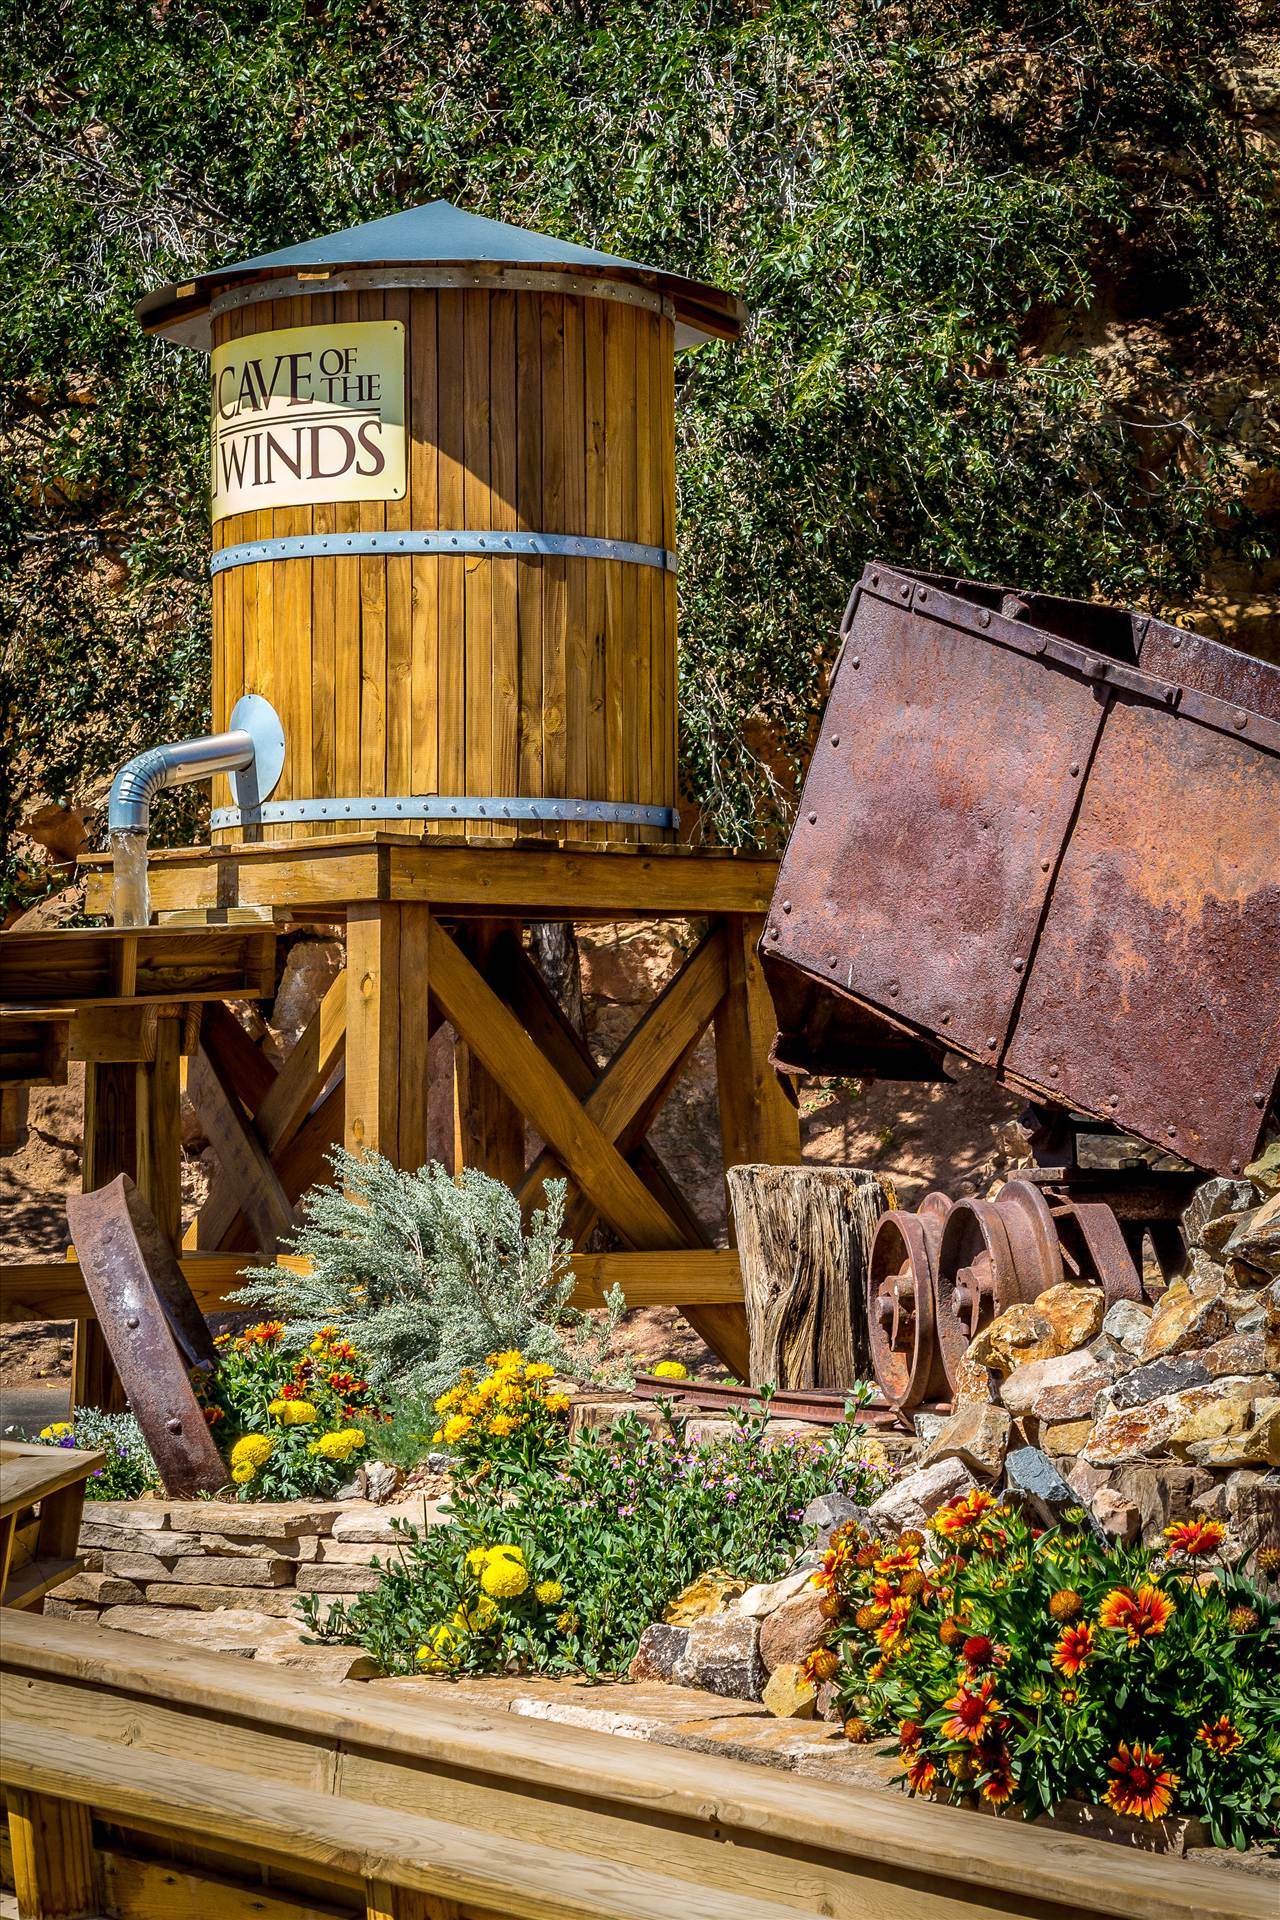 Cave of the Winds Display A rustic display outside the entrance to the Cave of the Winds in Manitou, Colorado. by Scott Smith Photos